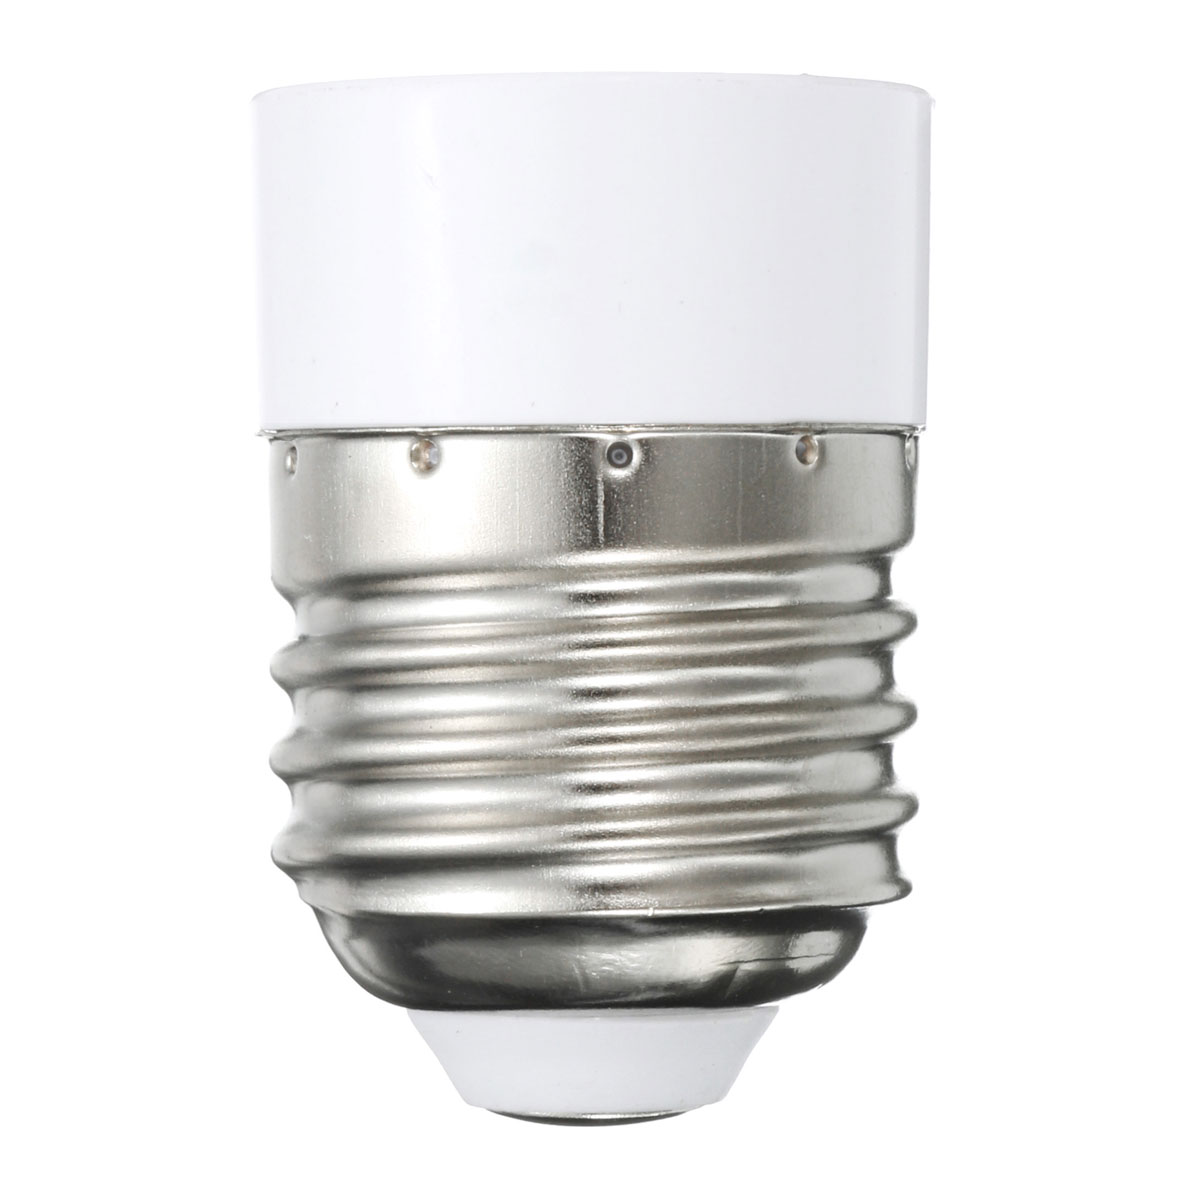 Find E27 to E14 Base LED Light Lamp Bulb Adapter Adaptor Converter Screw Socket Fit for Sale on Gipsybee.com with cryptocurrencies